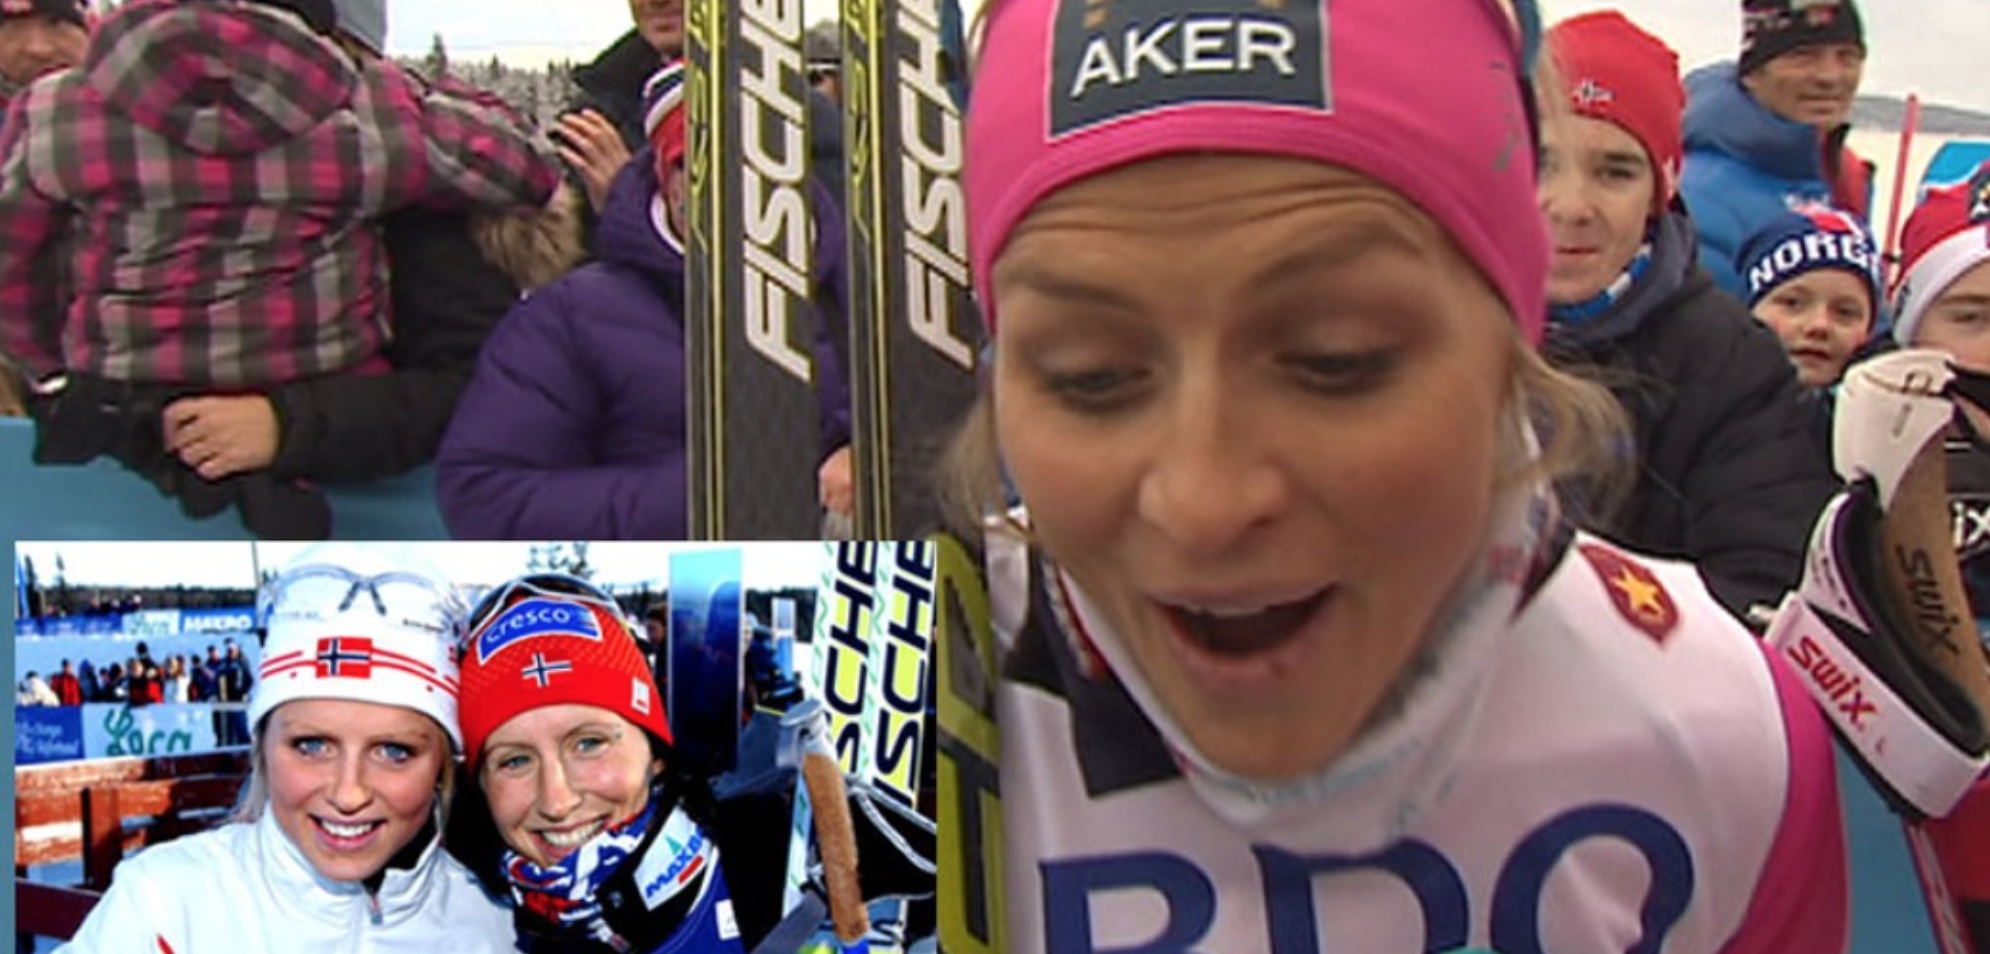 Therese Johaugs reacts when reporters show her a photo of herself and Marit Bjørgen from eight years ago in Beitostølen, the same place where Johaug won the opening race of the season on Friday. (Photo: NRK)